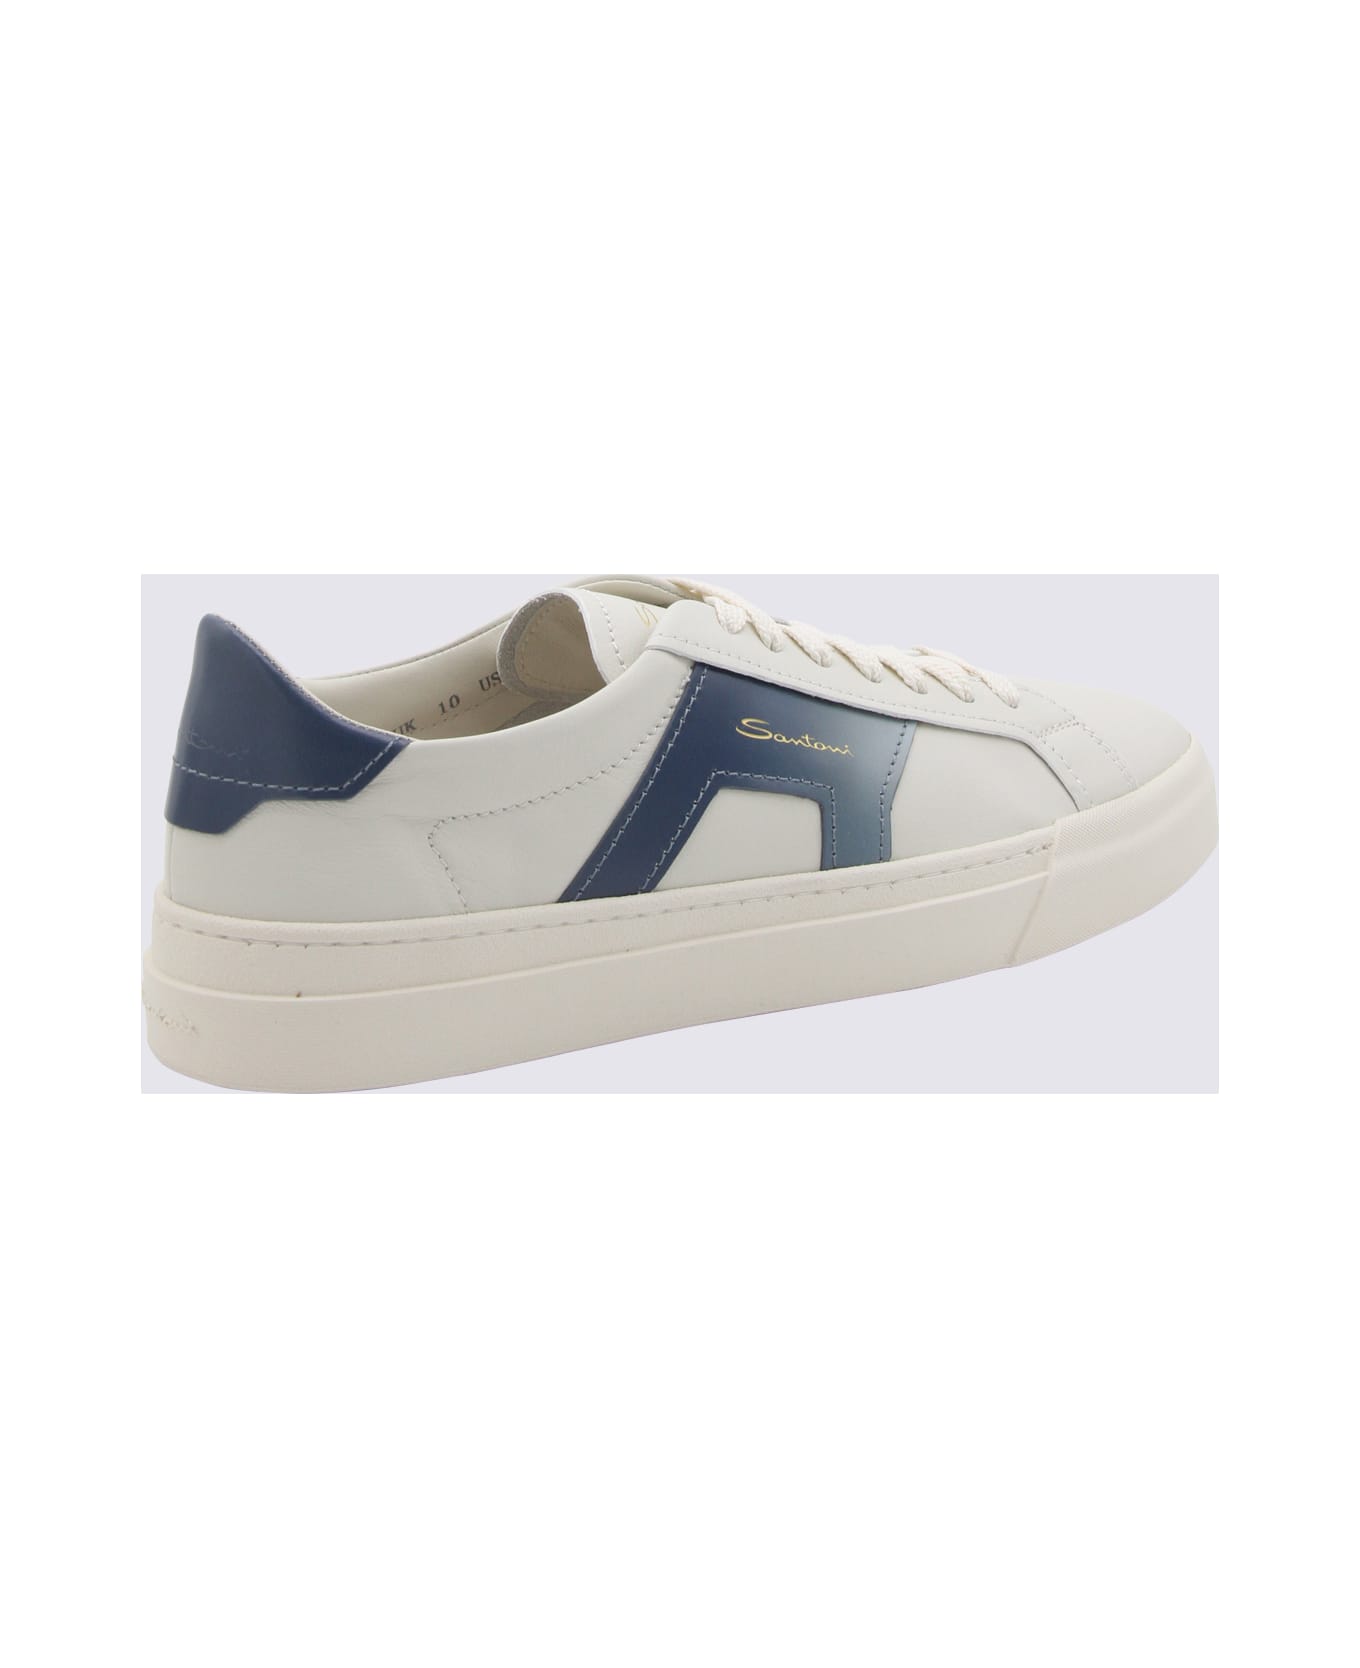 Santoni White And Blue Leather Buckle Sneakers - White